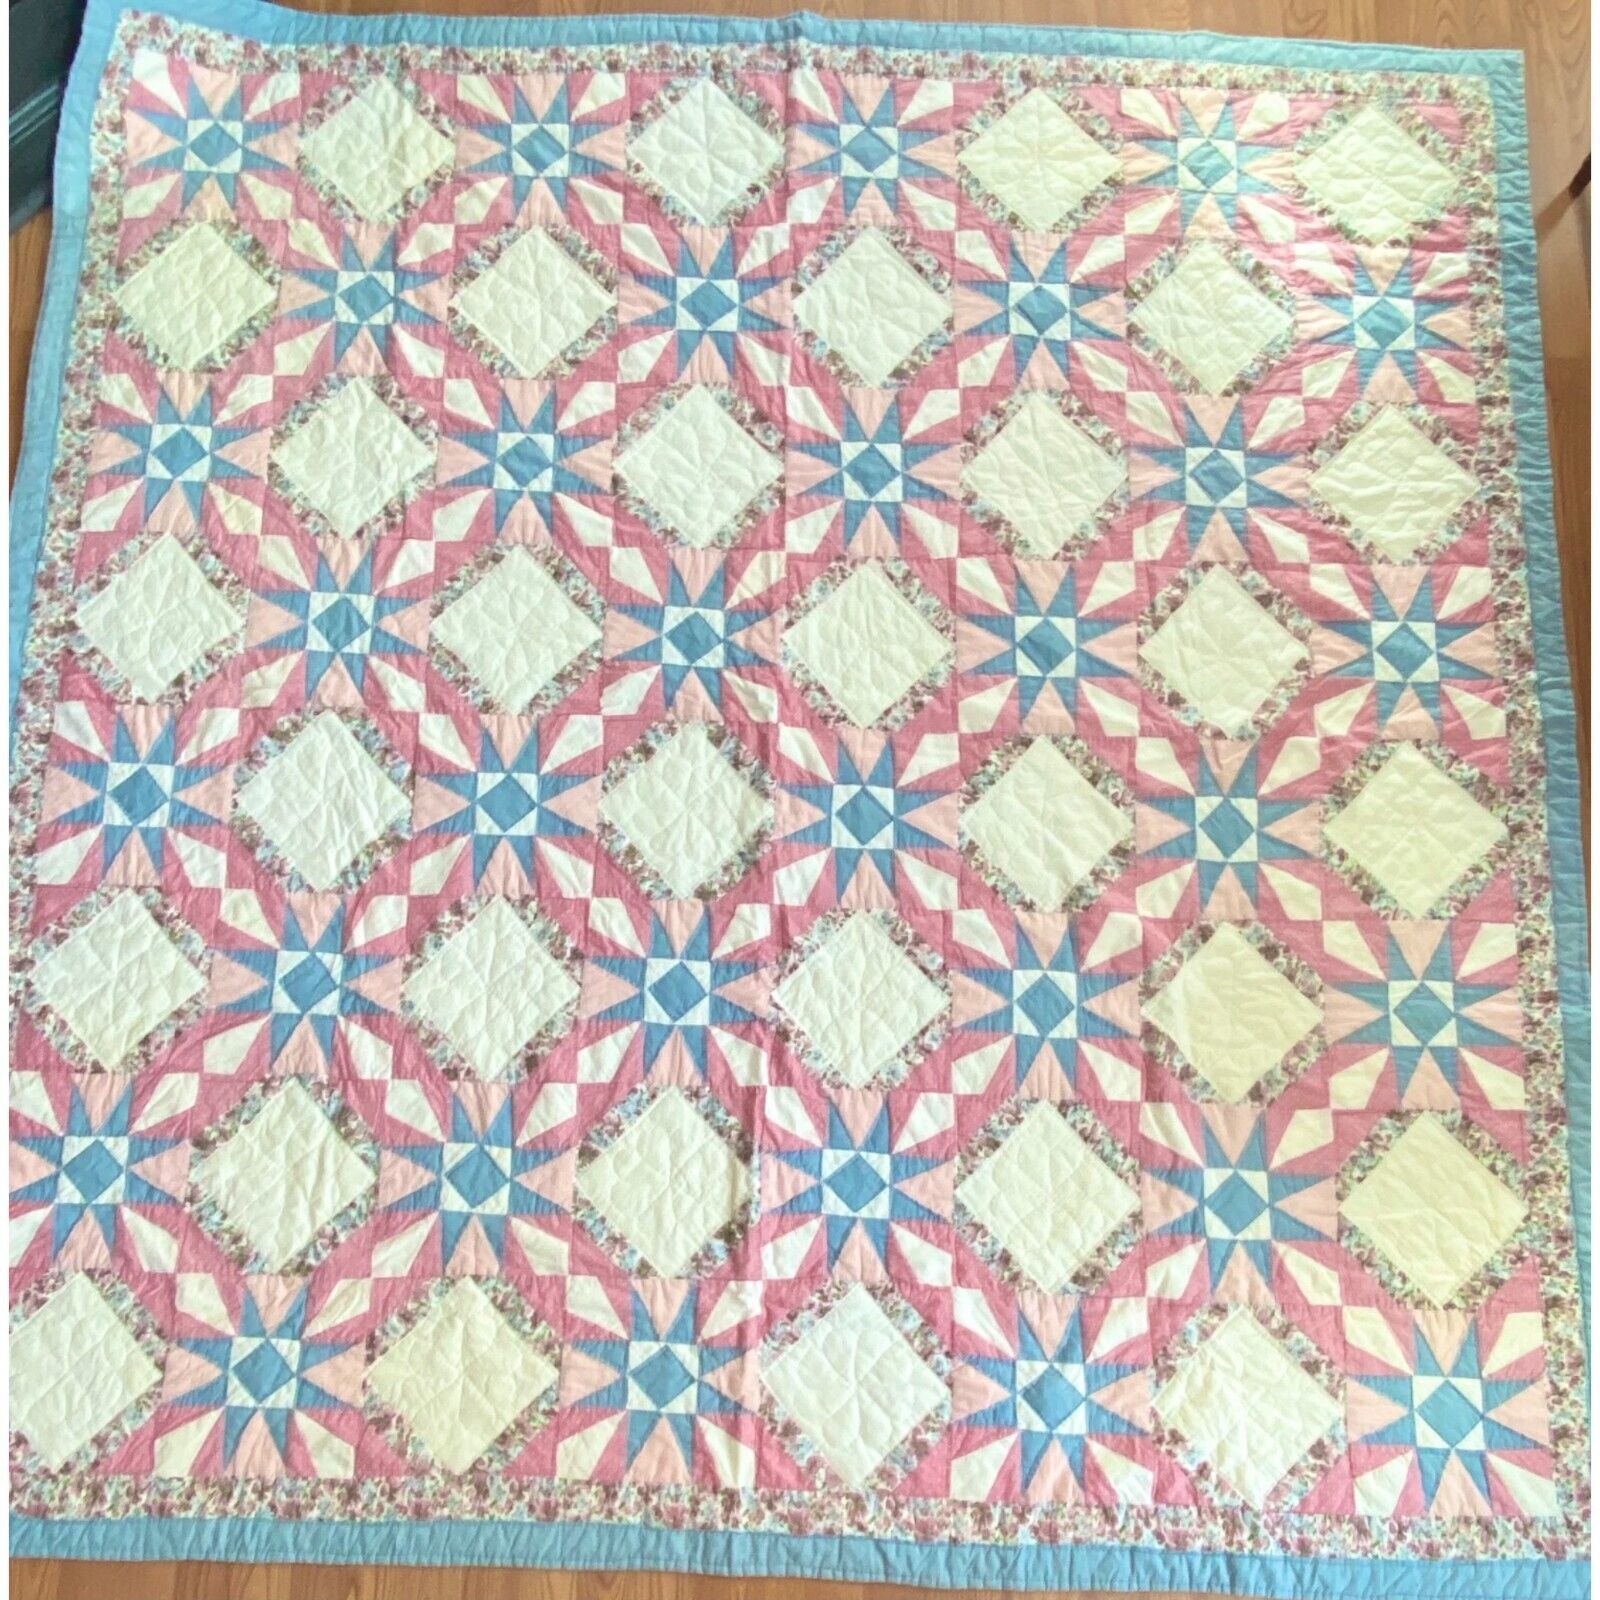 Quilt Blanket Hand Made Stitched Blue Pink Flowers Floral Stars Bed Spread